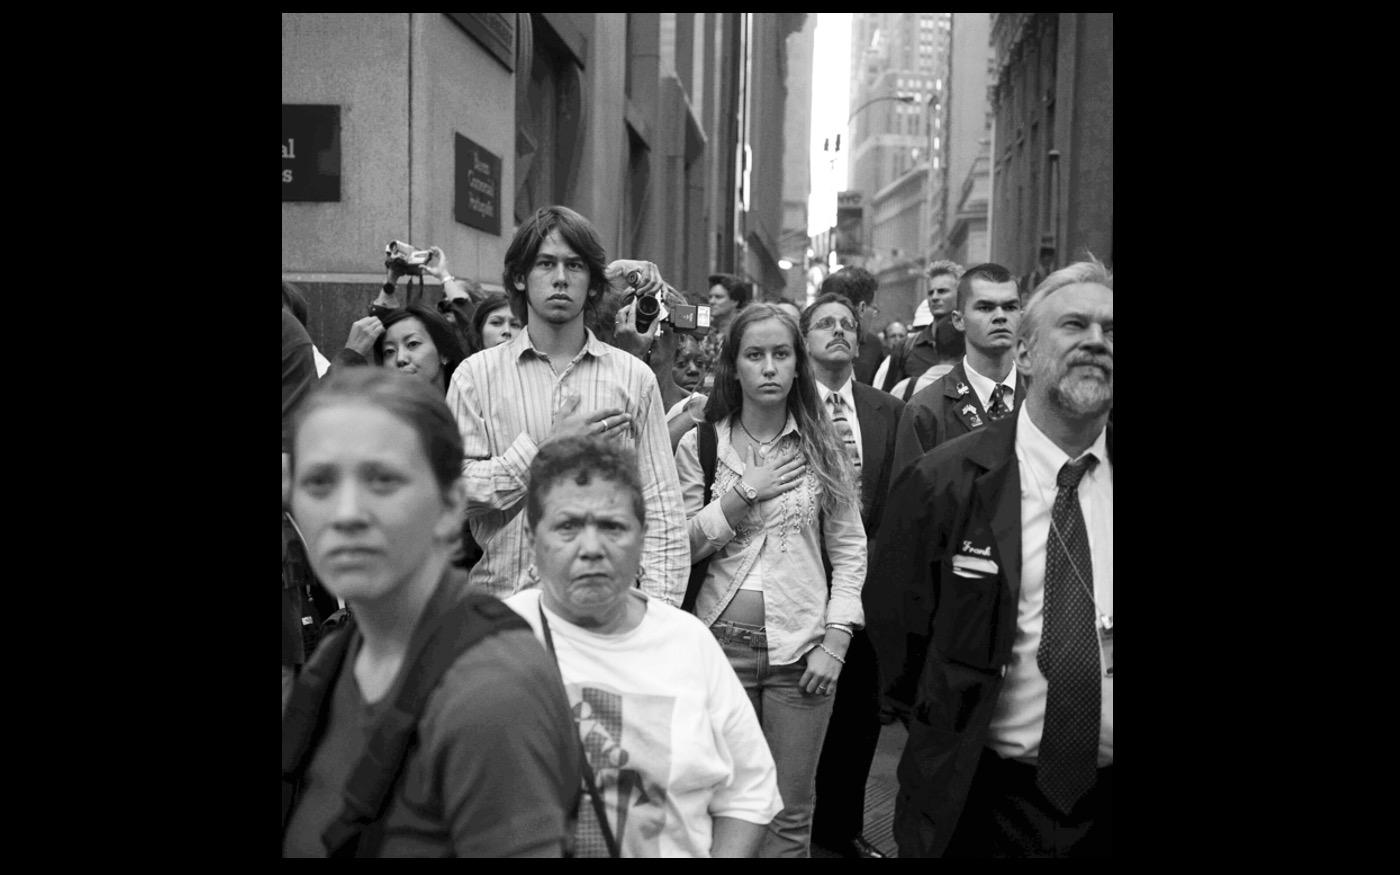 The first anniversary of the 9/11 attacks: Wall Street - New York  2002 : Looking Back: 60 Years of Photographs : David Burnett | Photographer